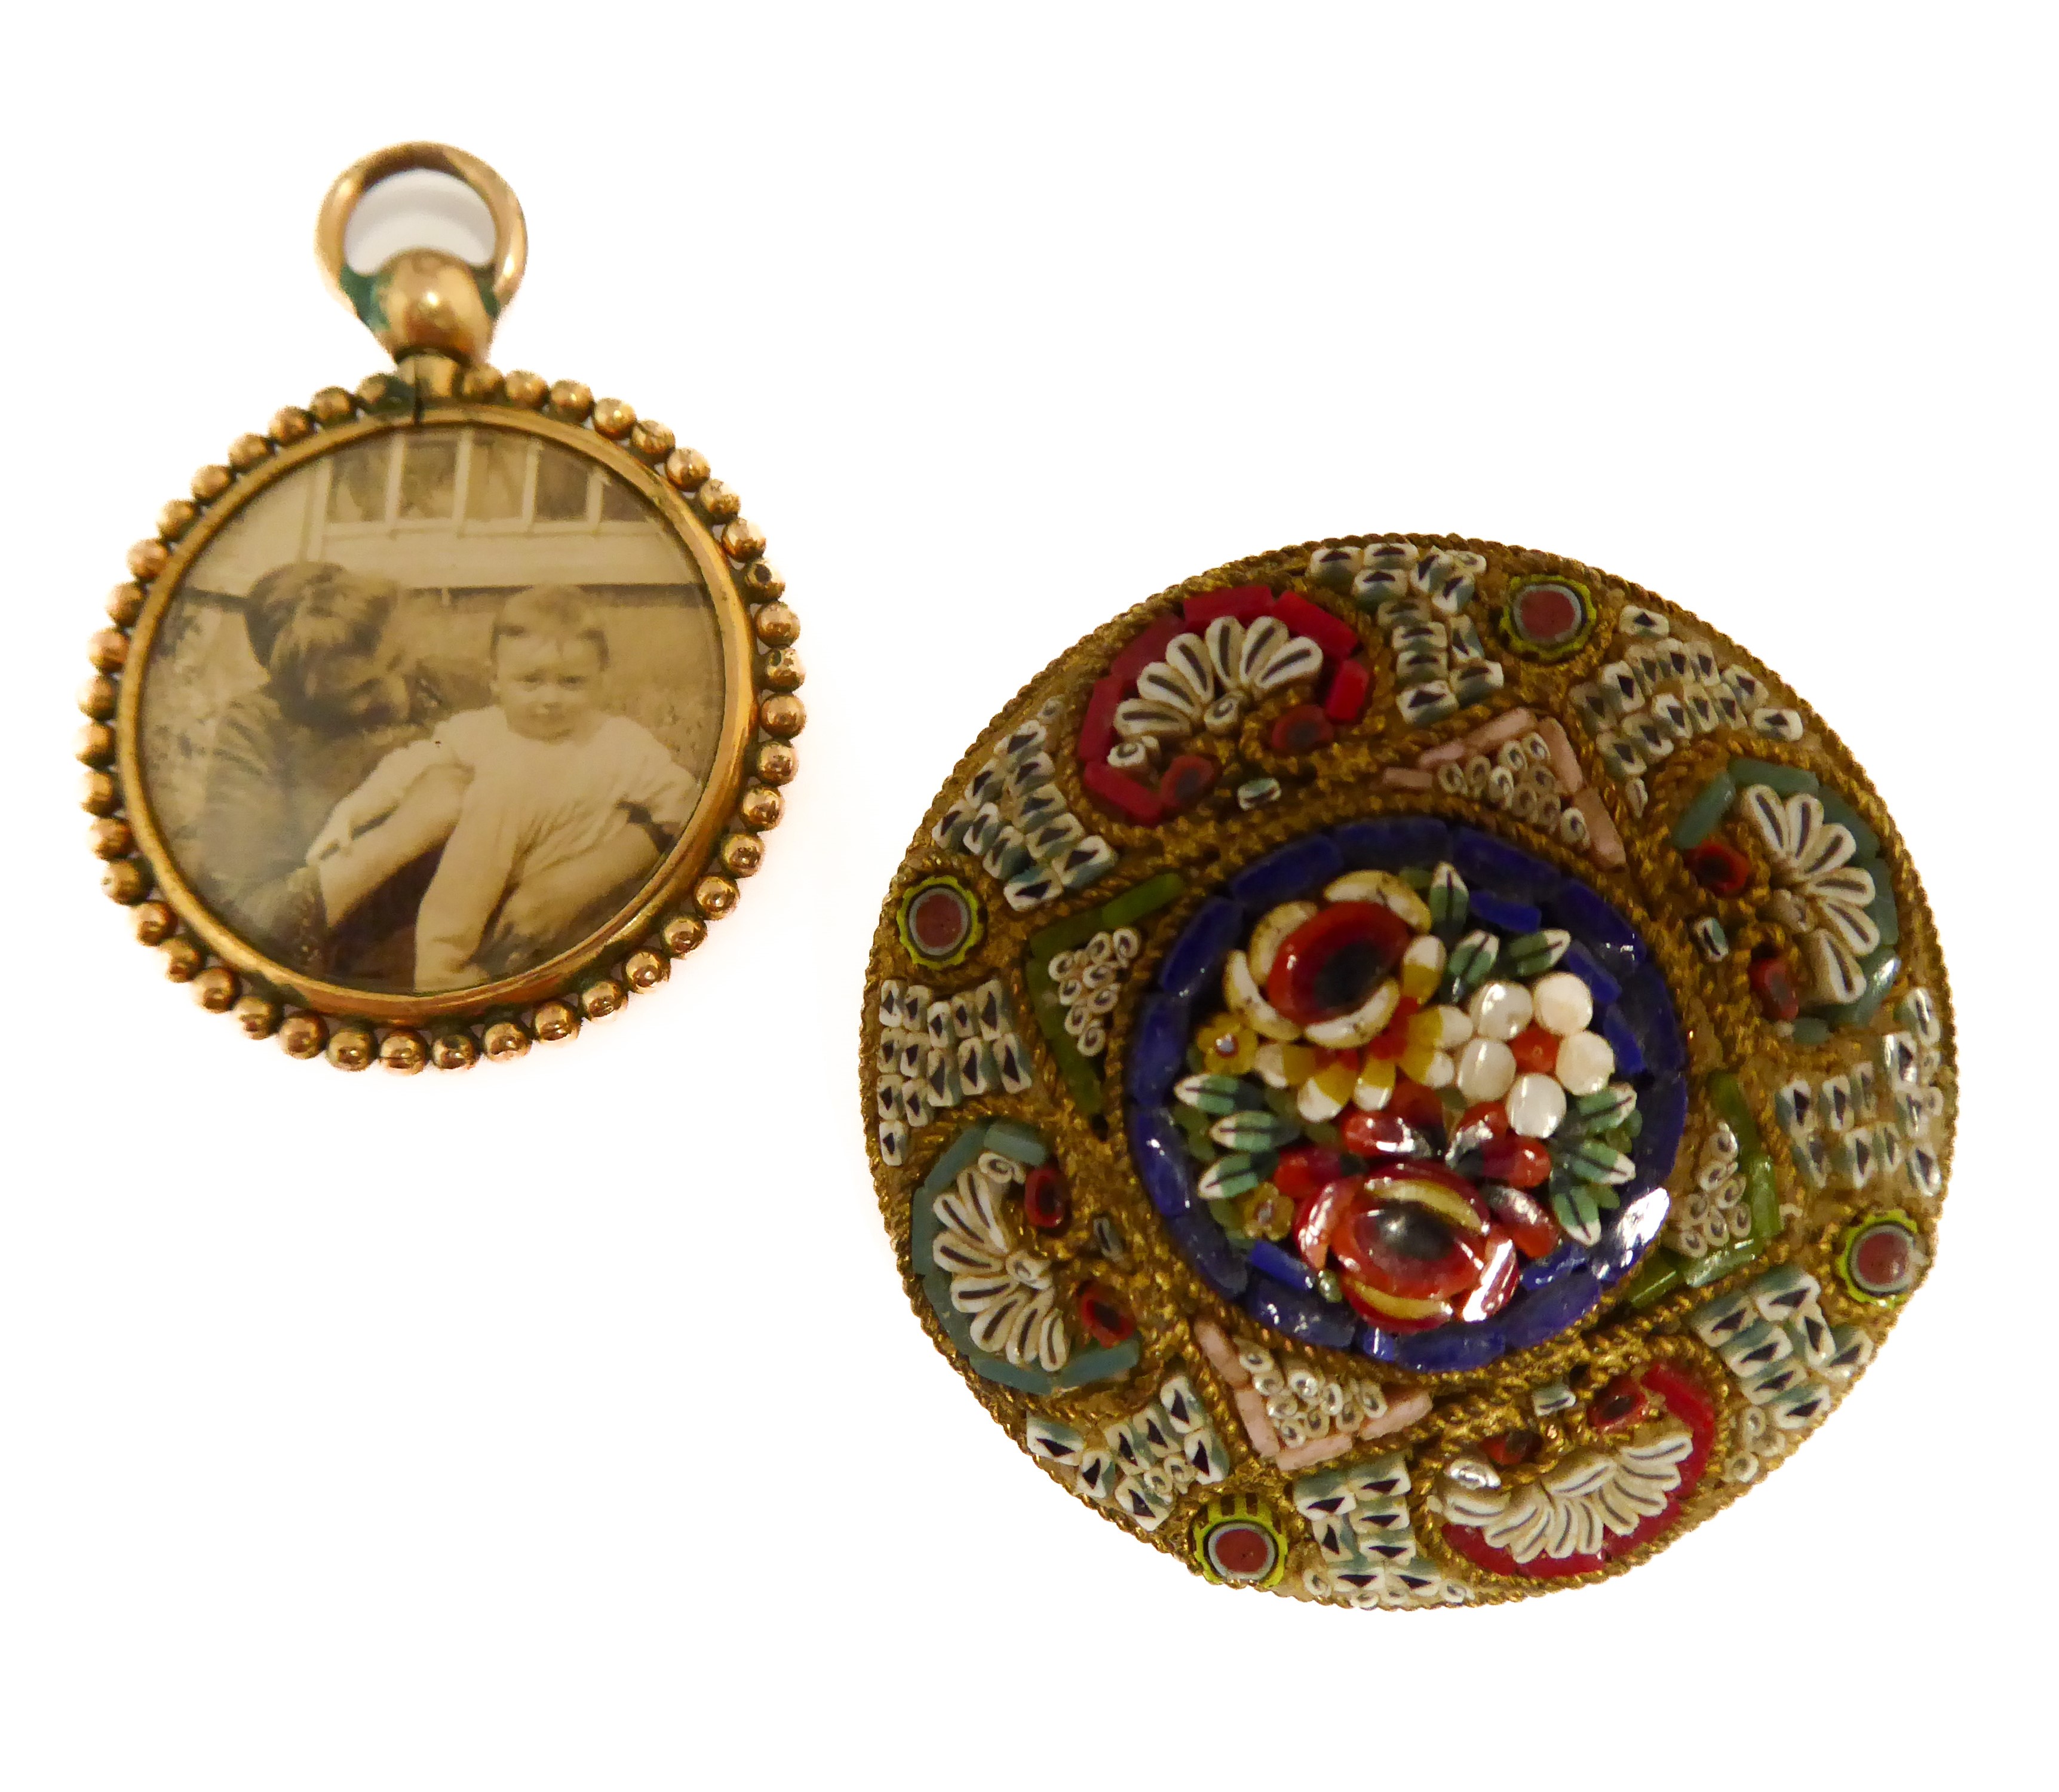 An unusual late 19th/early 20th century circular brooch pietra dura-set with various flowers,